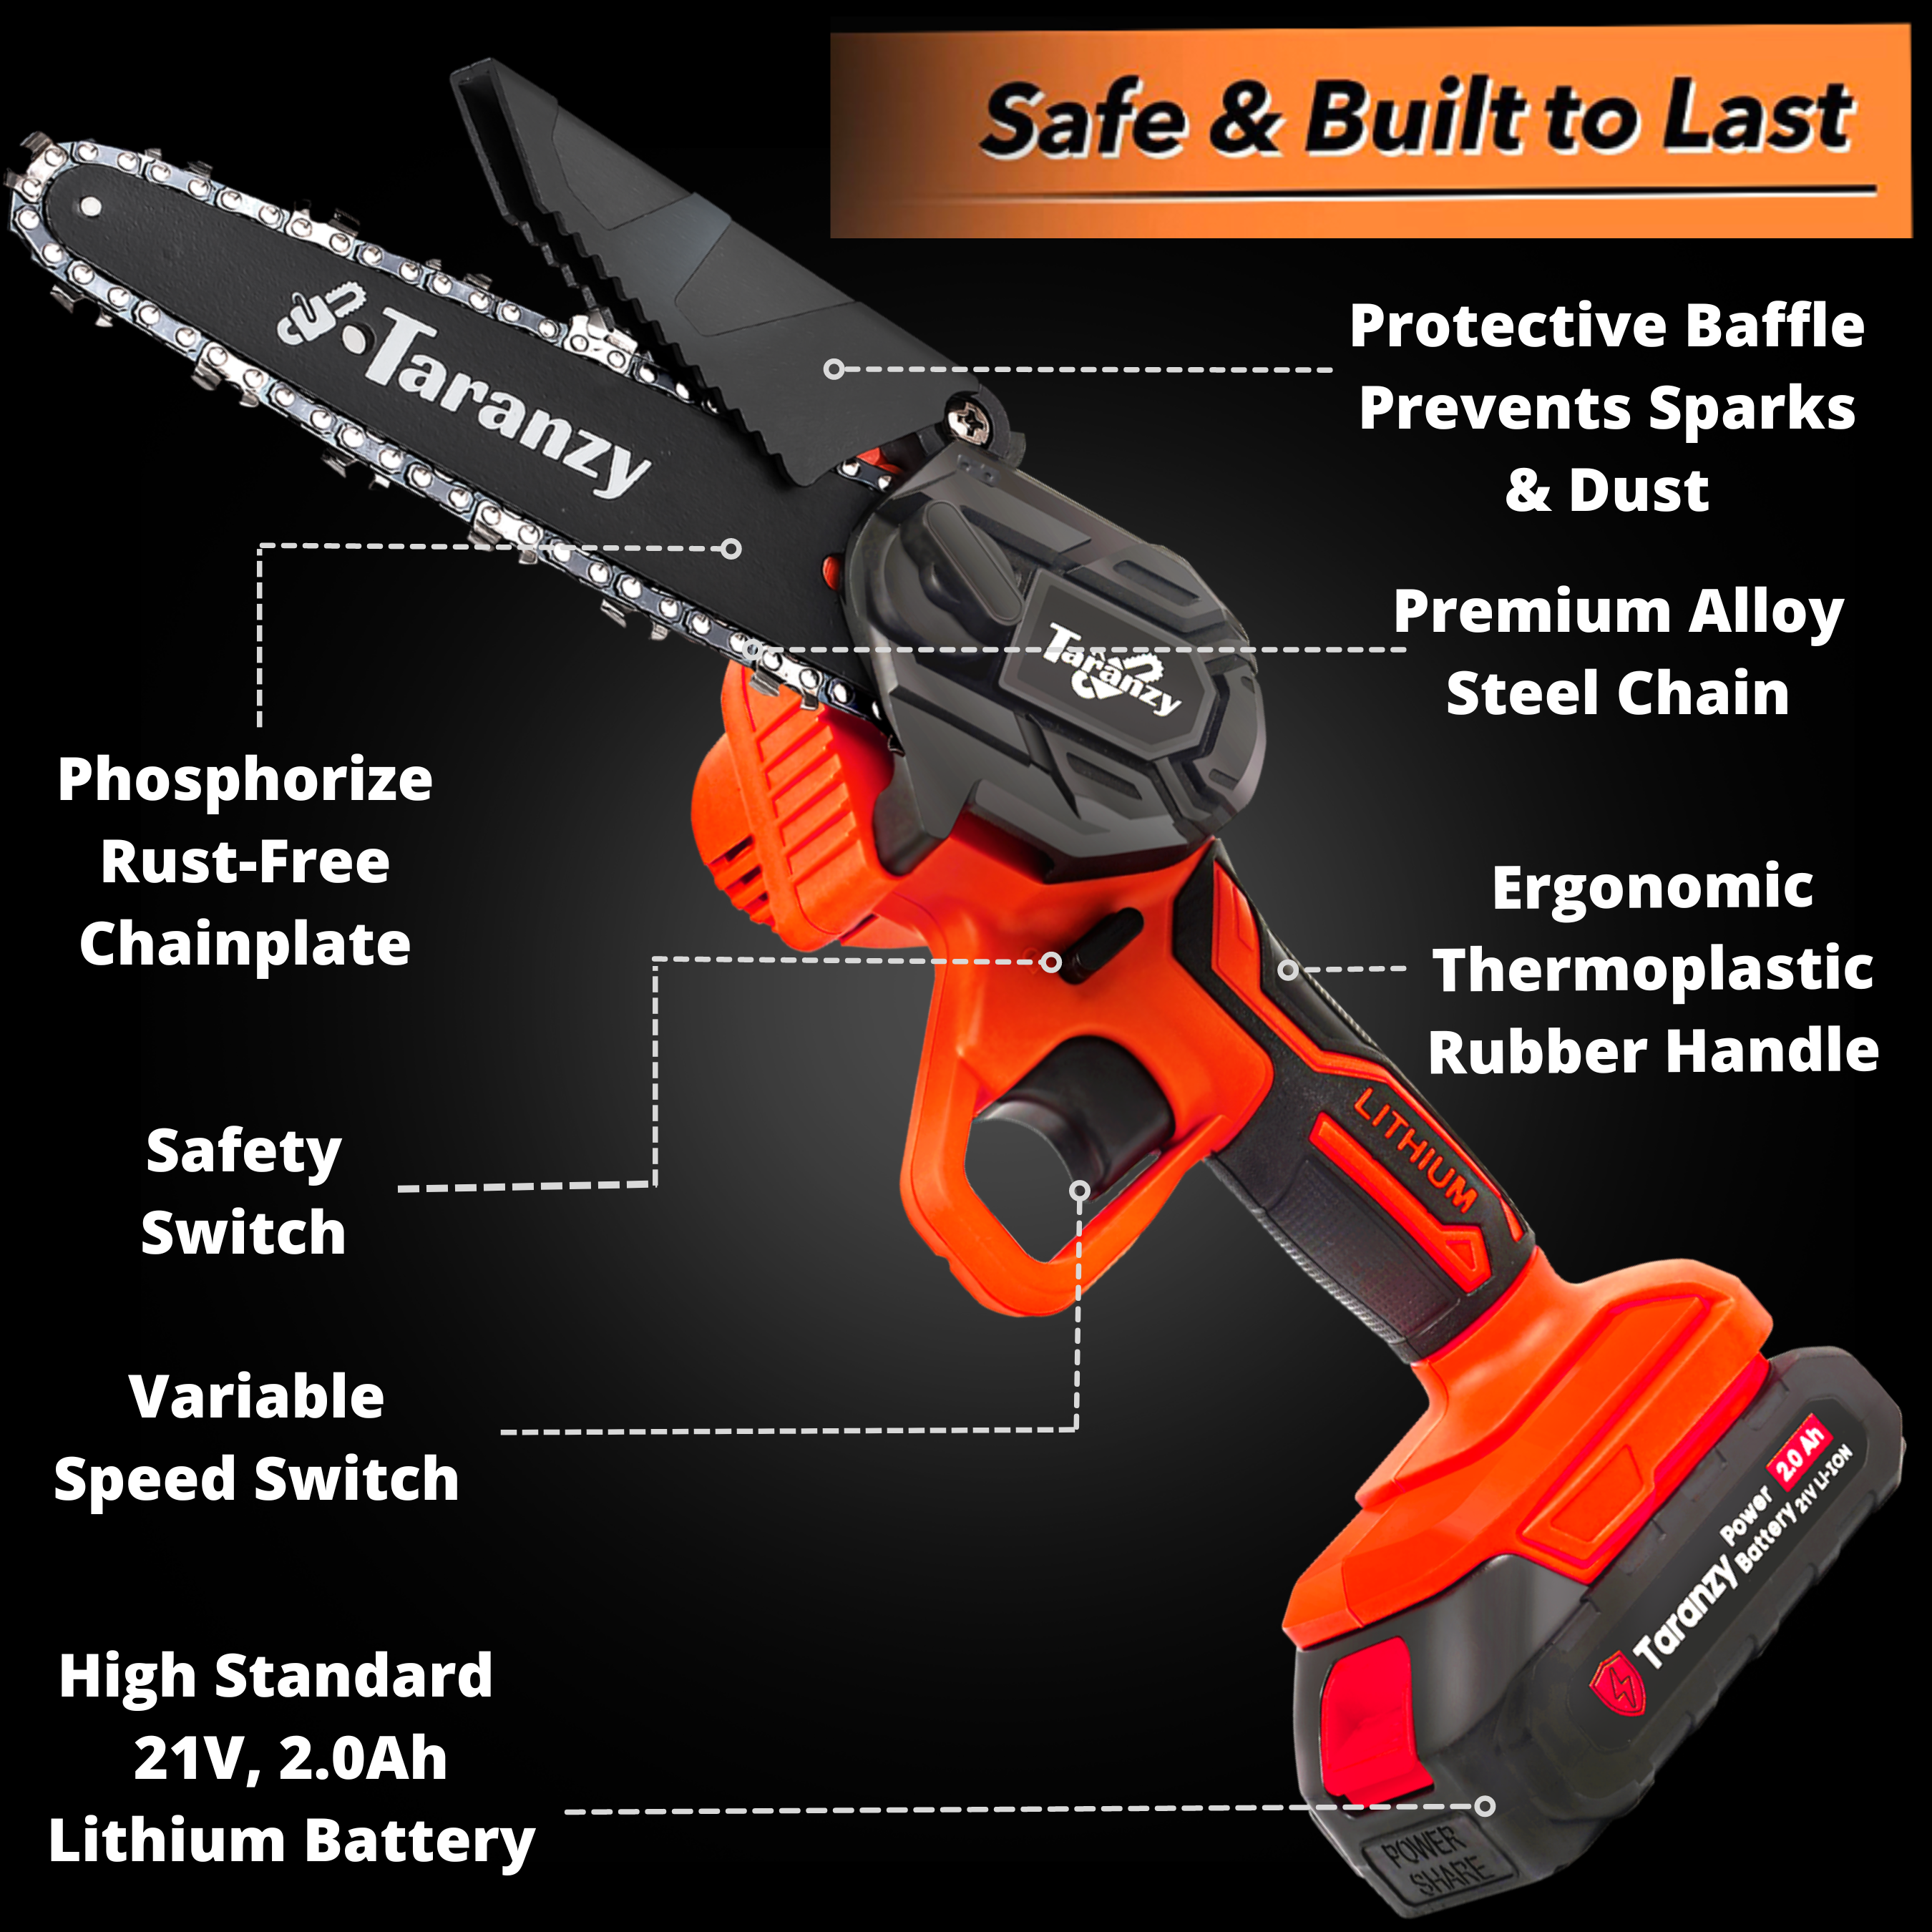 4 REASONS WHY ELECTRIC CHAINSAWS ARE IDEAL FOR TREE PRUNING PROJECTS